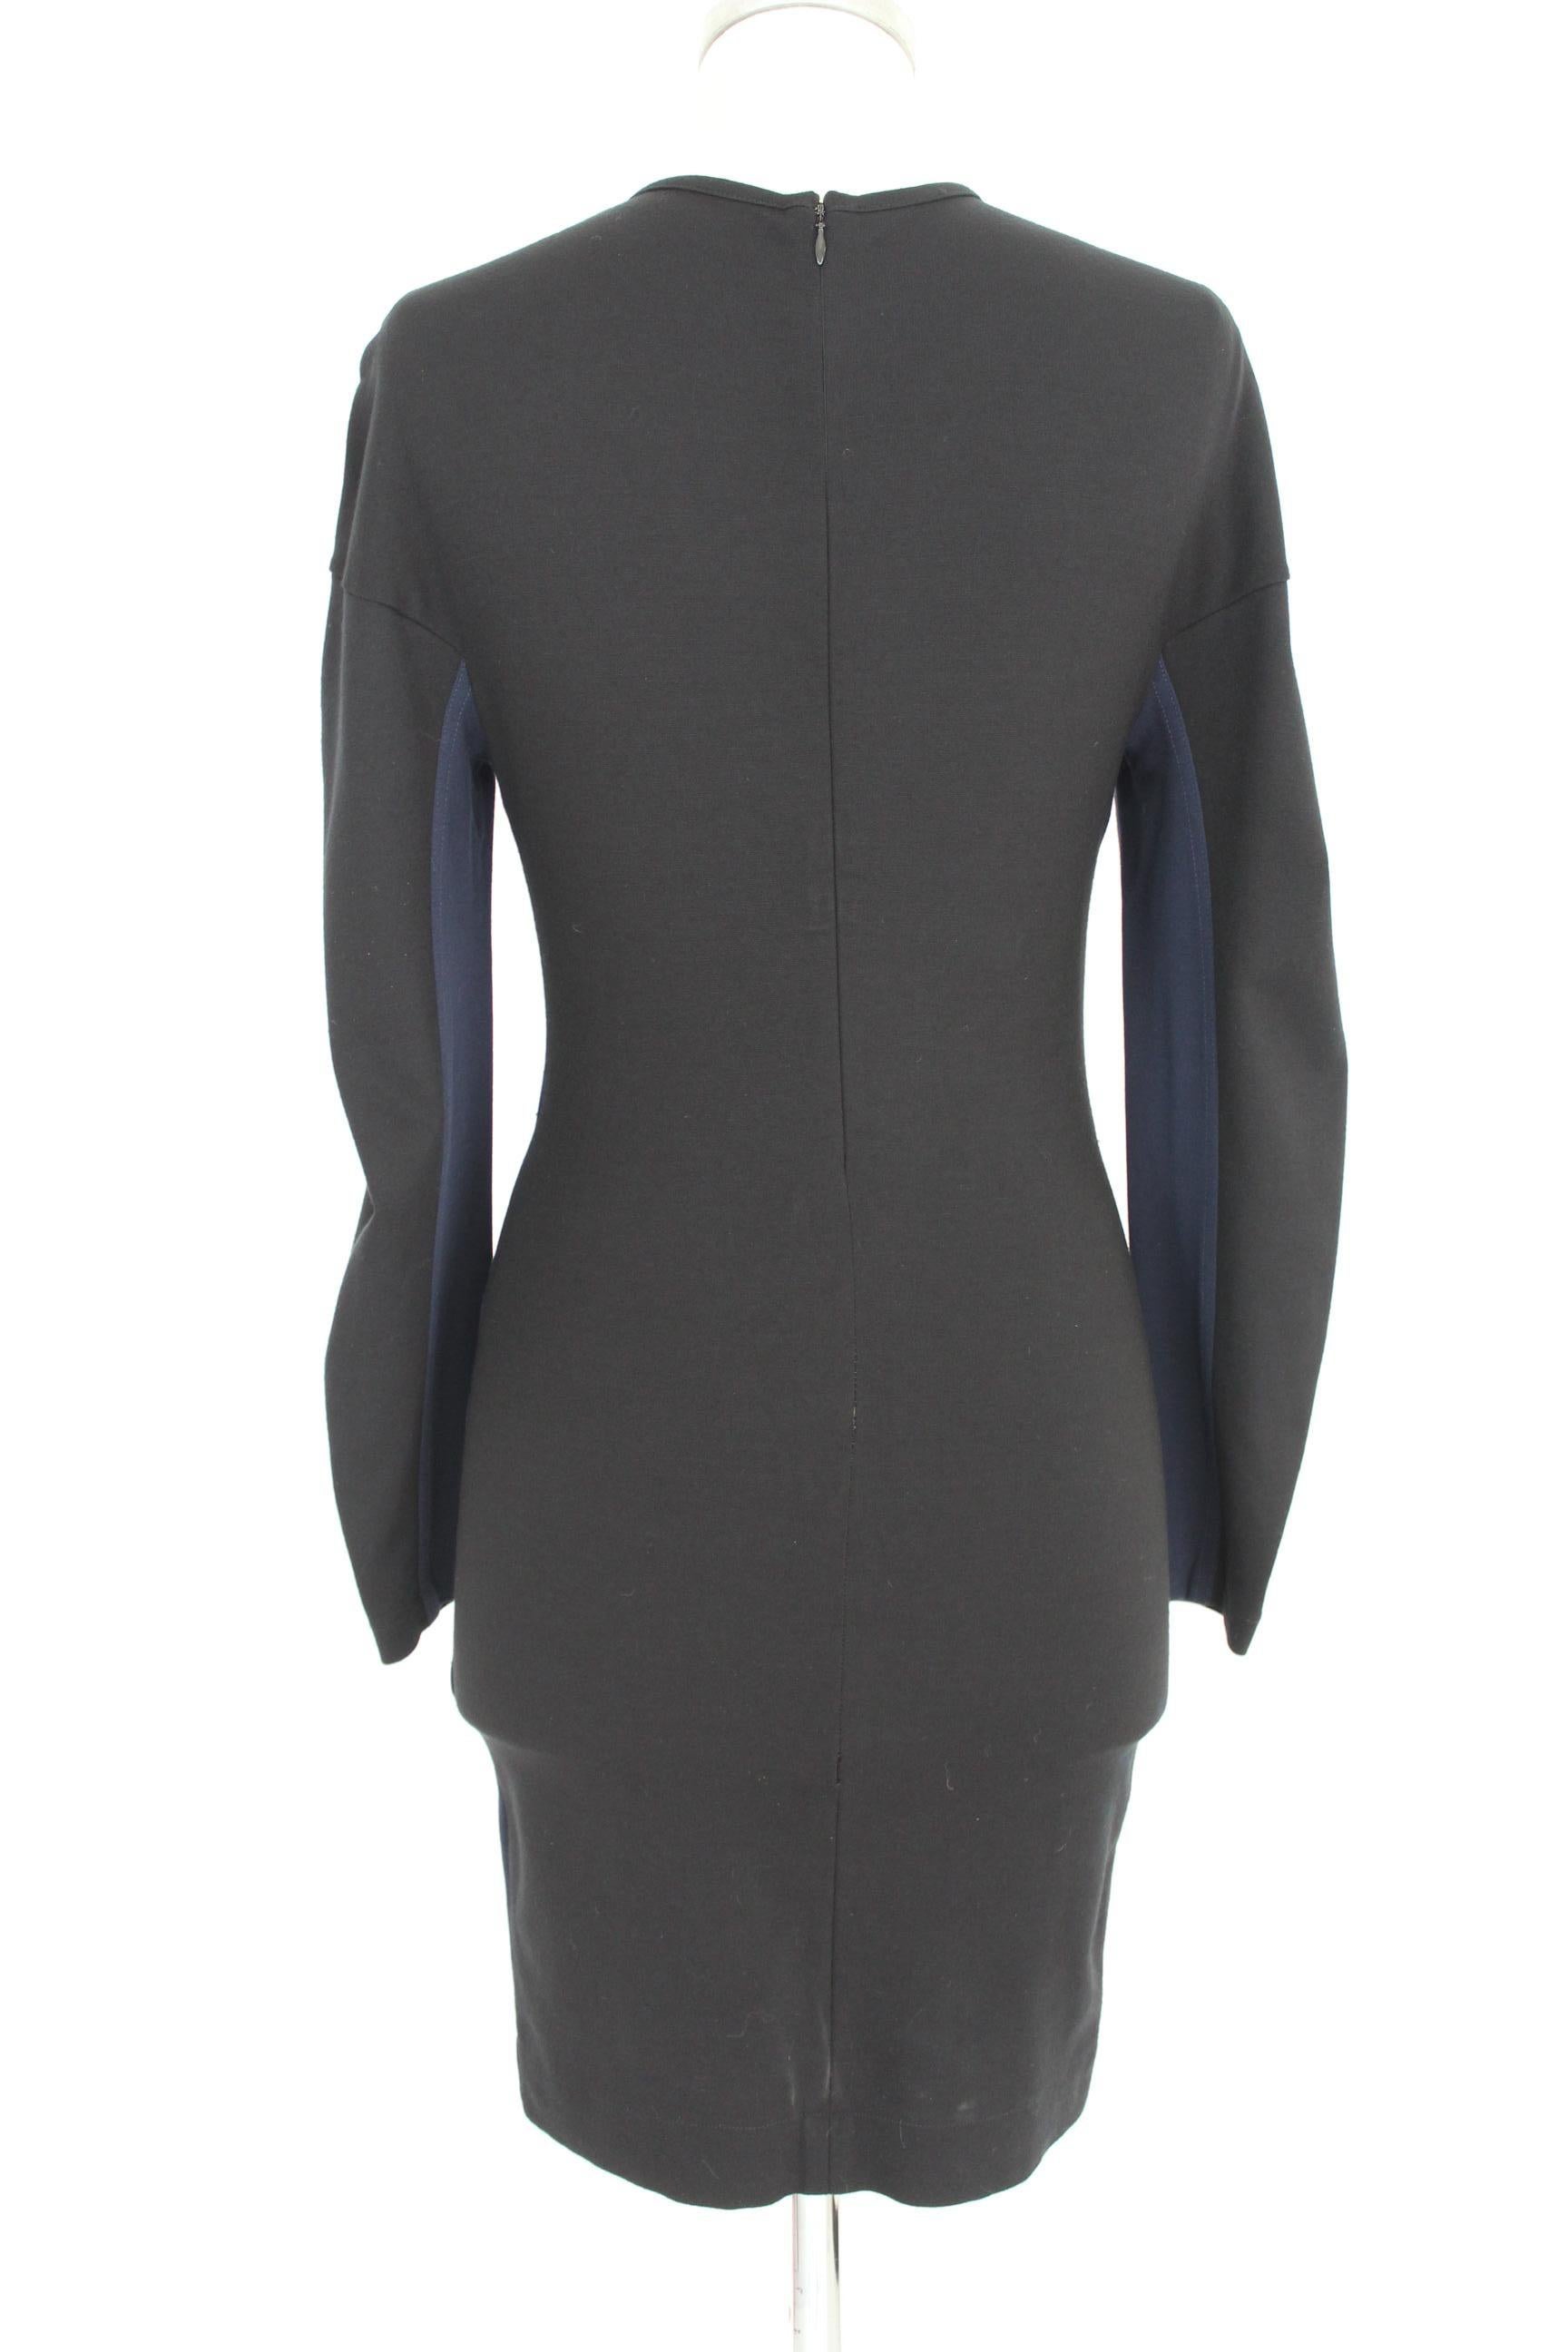 Stella Mc Cartney 2000s woman dress. Sheath dress narrow color black and blue electric, 69% viscose 25% polyamide 6% elastene. Made in Italy. Excellent vintage conditions.


Size: 42 It 8 Us 10 Uk

Shoulder: 42 cm
Bust / Chest: 42 cm
Sleeve: 61